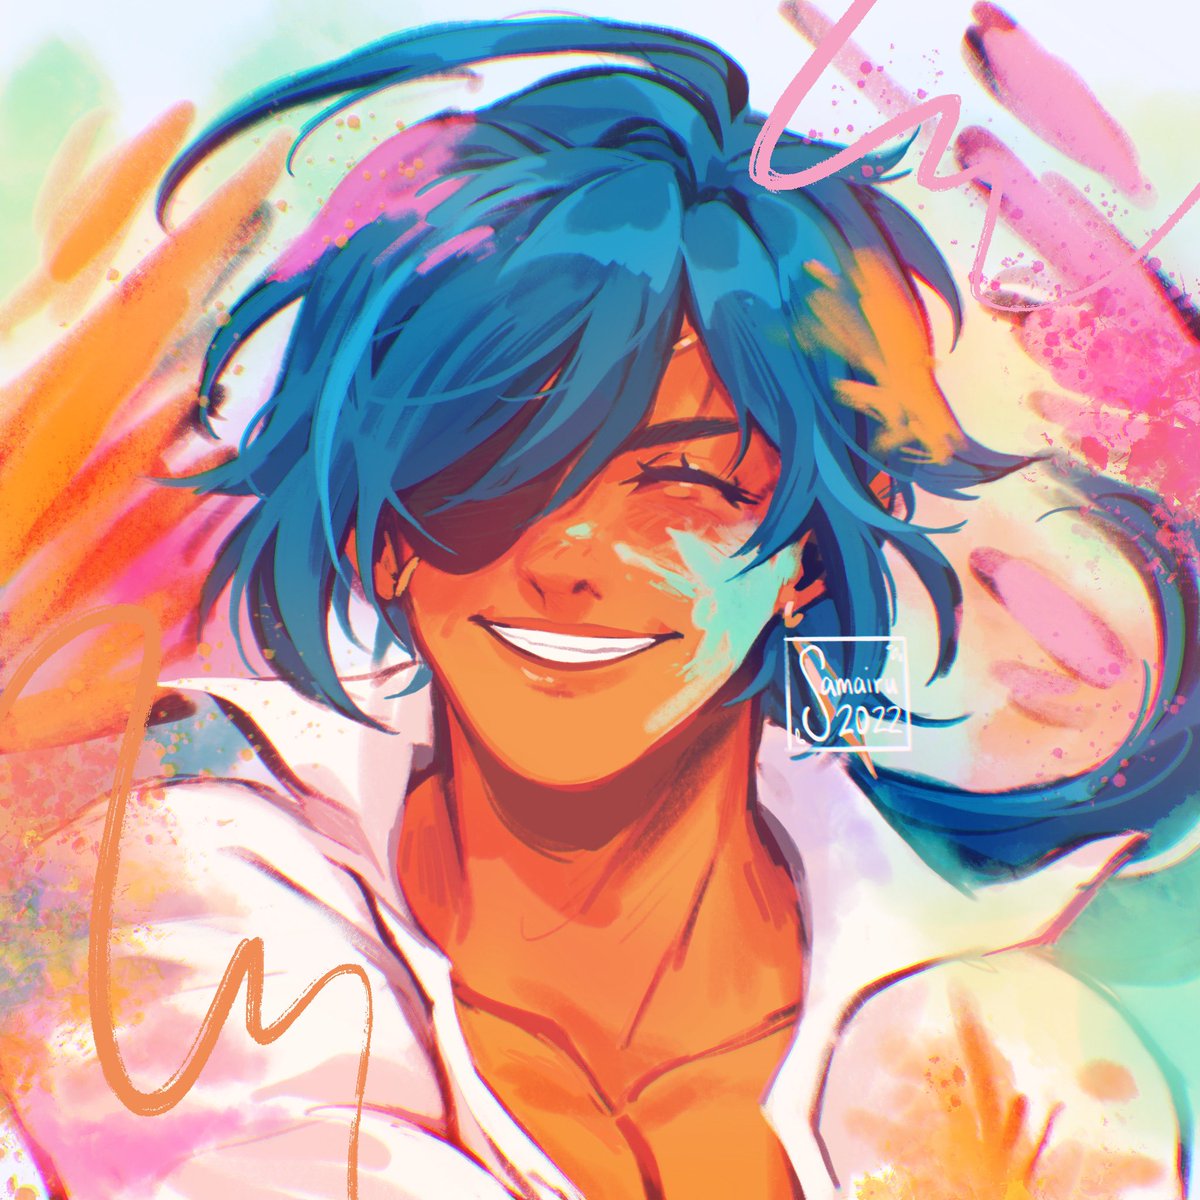 No new art for Holi this year but Happy Holi 🥰